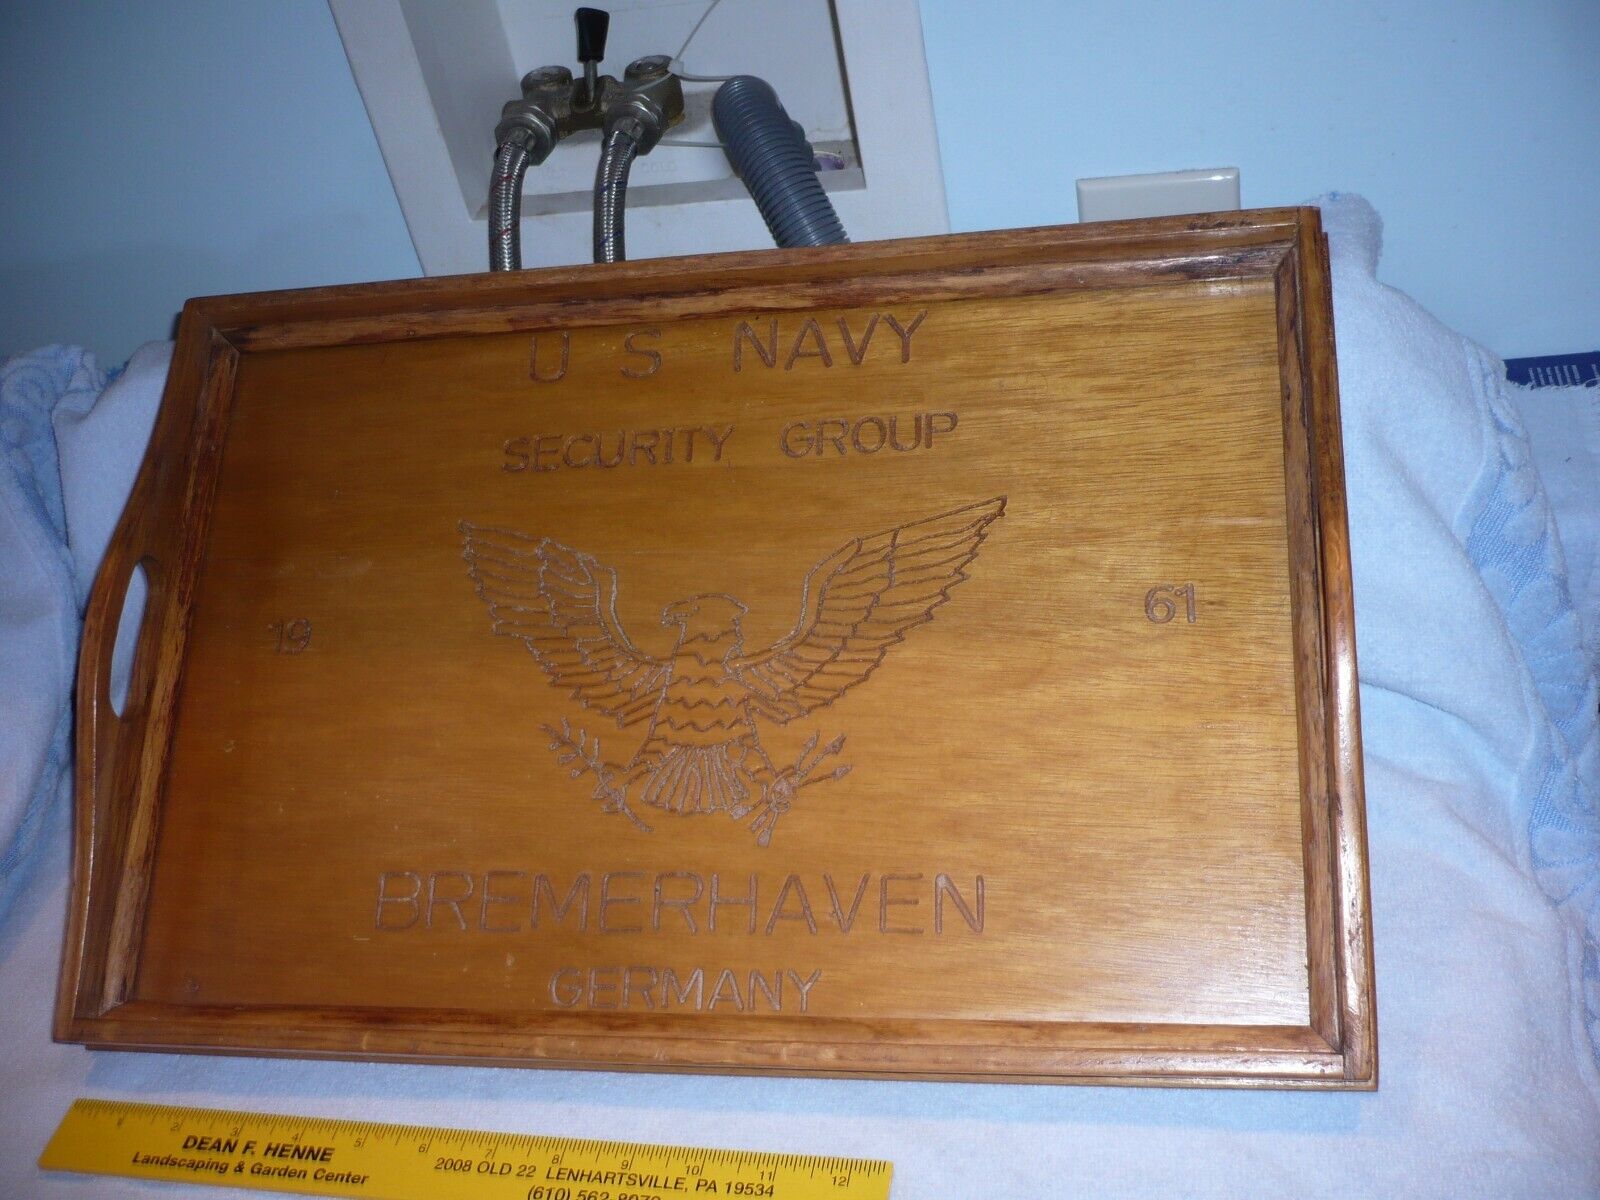 GREAT RARE 1961 U.S. Navy security group Bremerhaven Germany souvenir tray